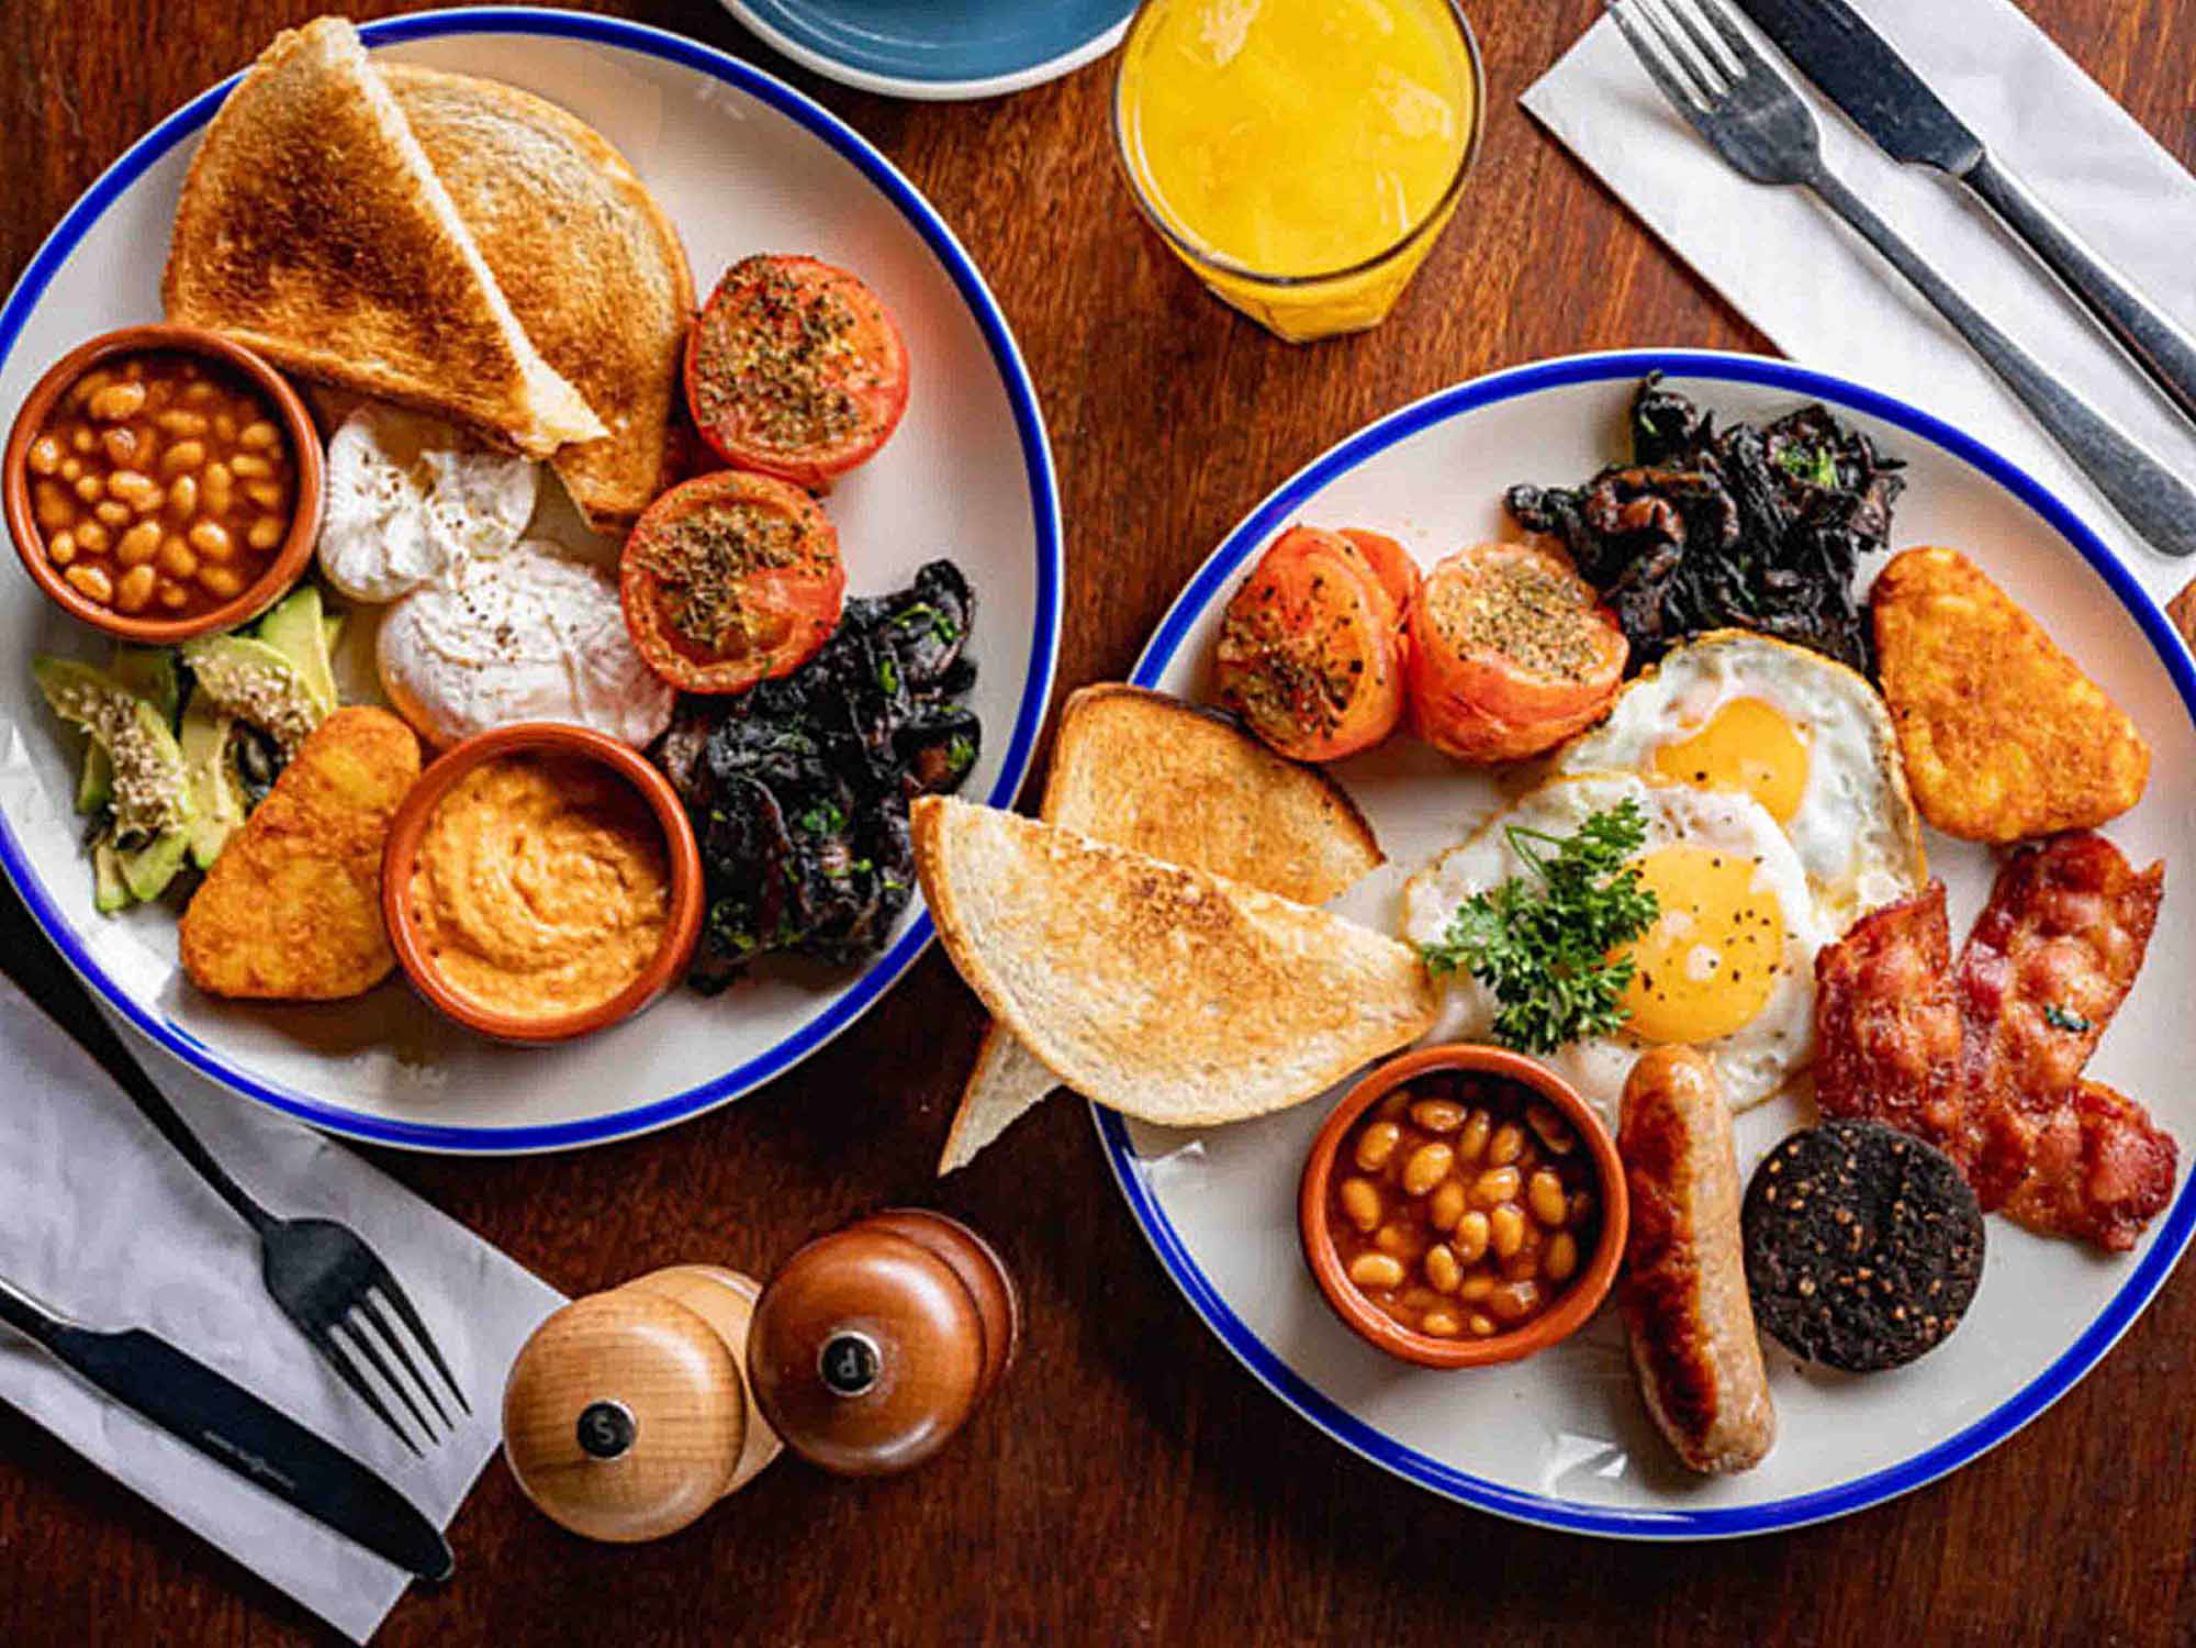 Best Bottomless Brunch in Chester - Brewhouse and Kitchen